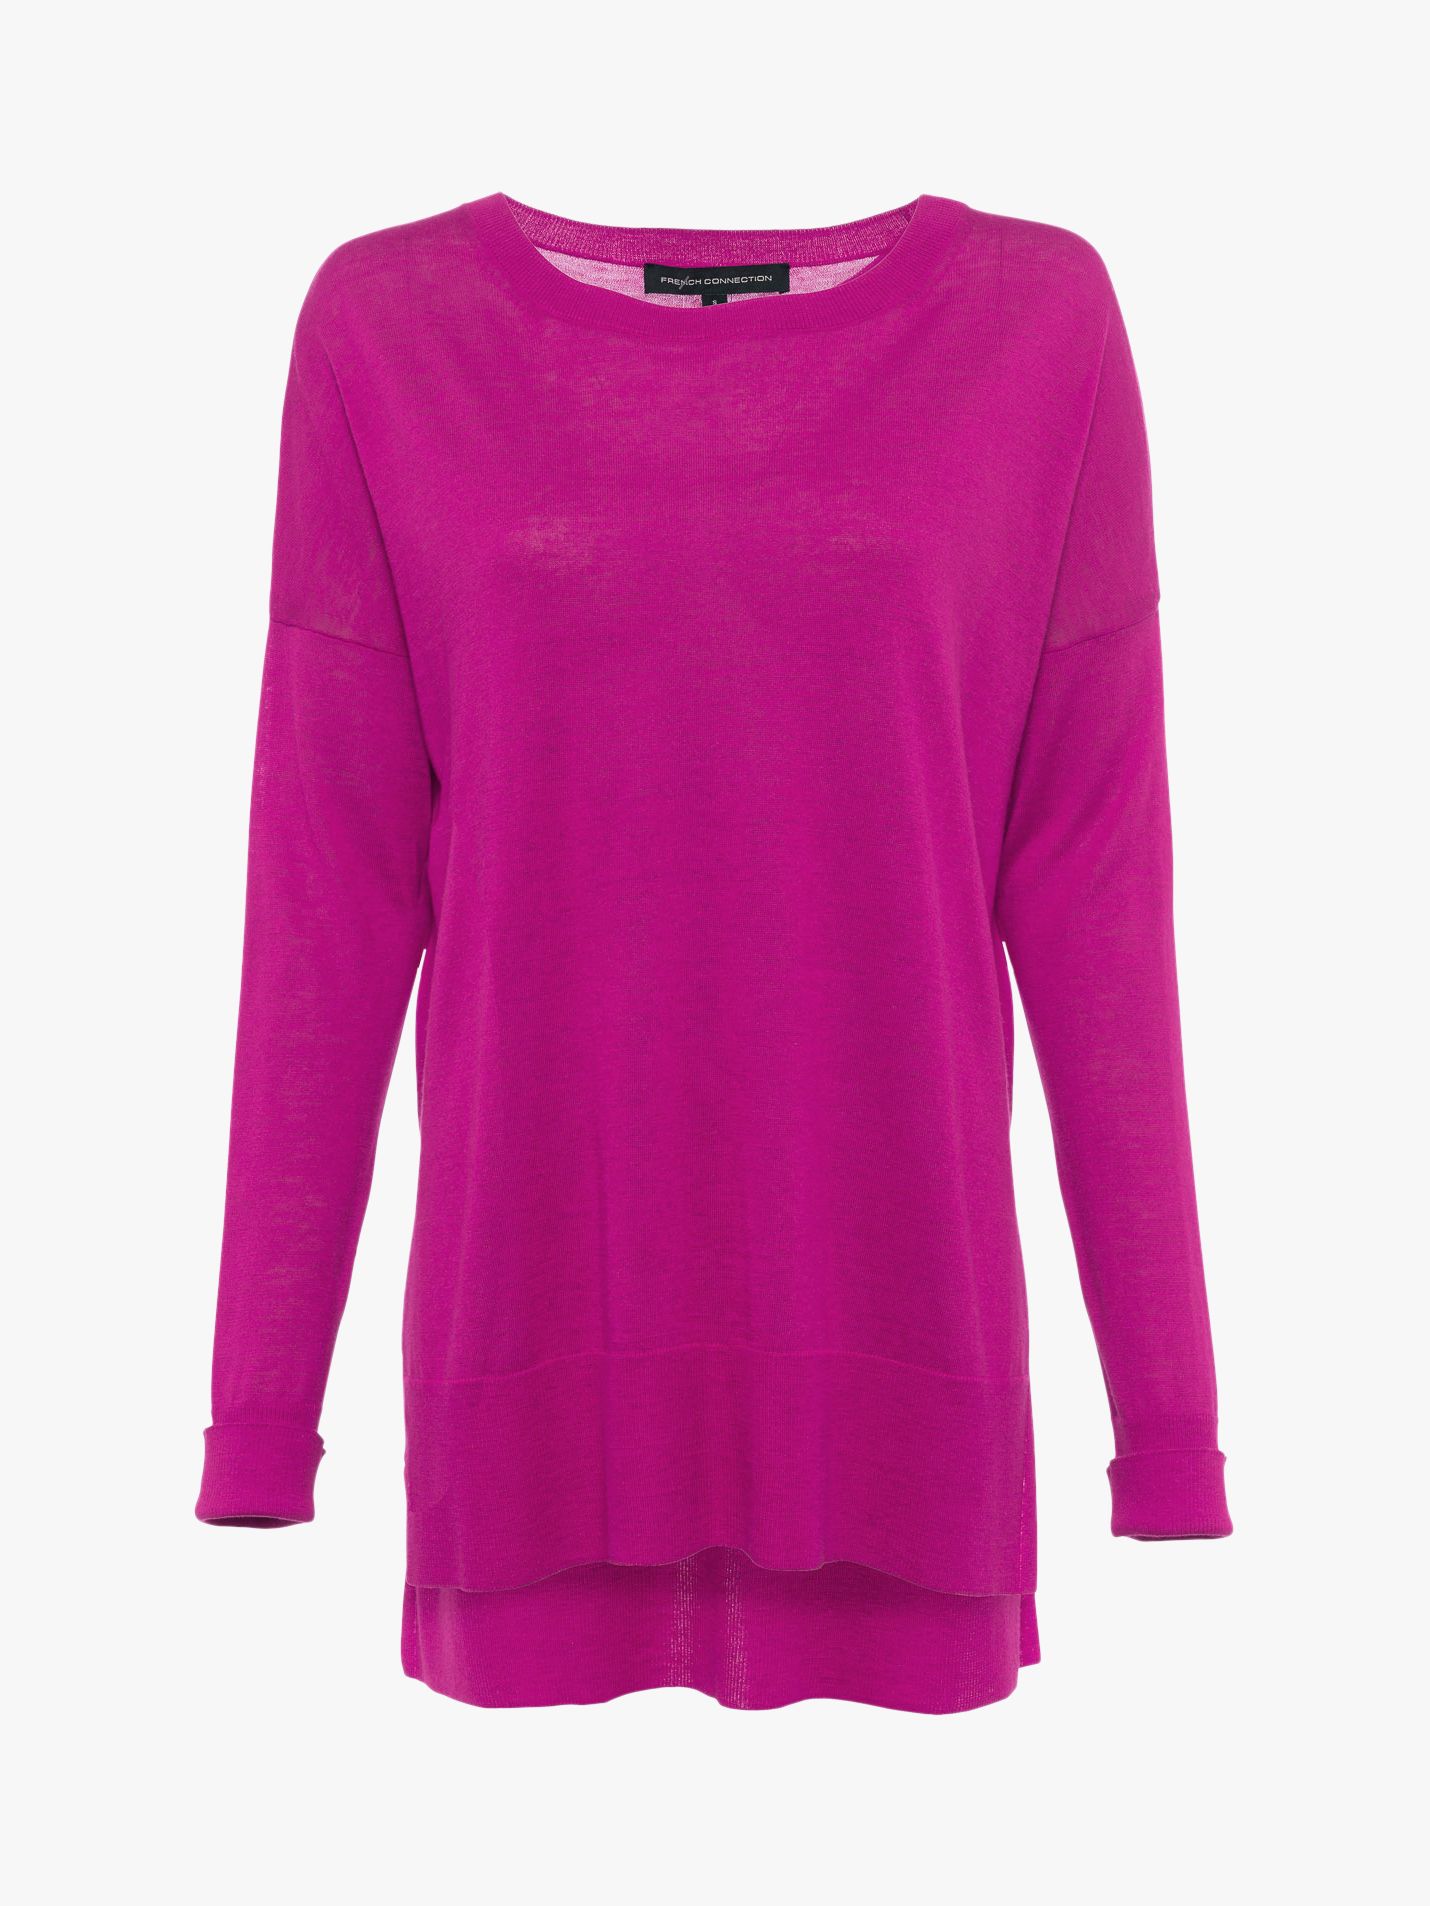 French Connection Spring Round Neck Jumper